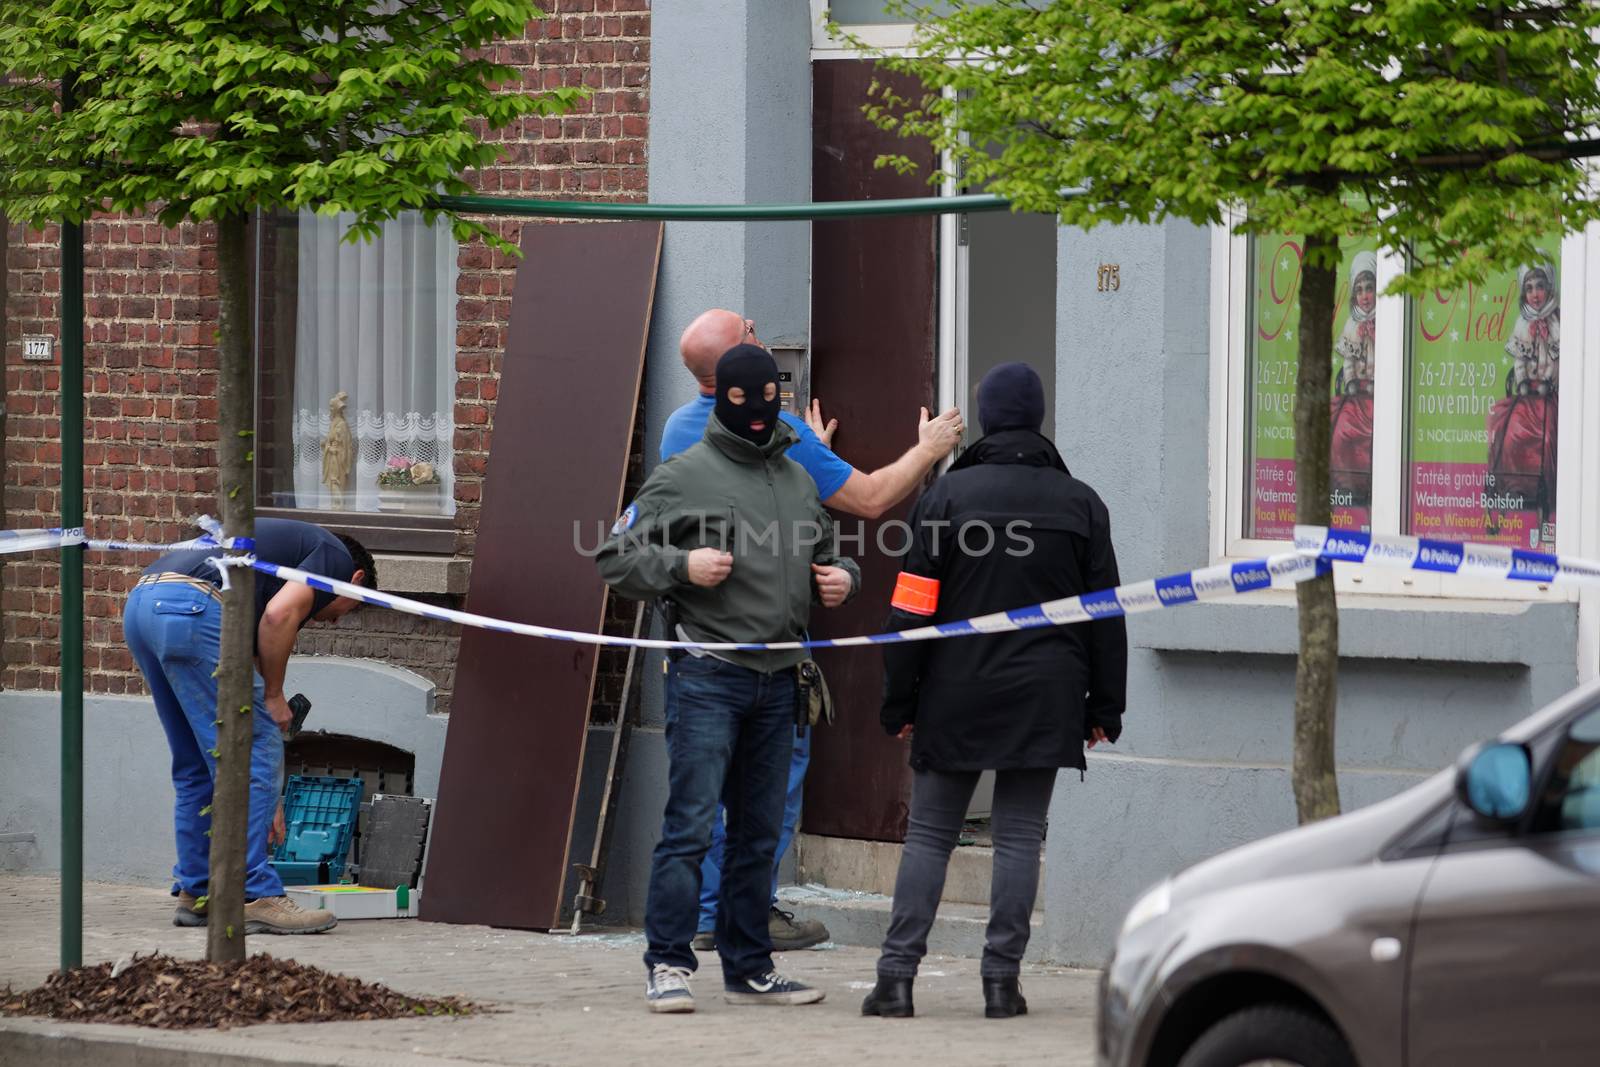 BELGIUM, Brussels: Belgian police are pictured outside a house searched in Uccle, a Brussels' municipality, on April 12, 2016. Three people have been arrested during this new raid linked to the investigation into the November Paris attacks, federal prosecutors said.